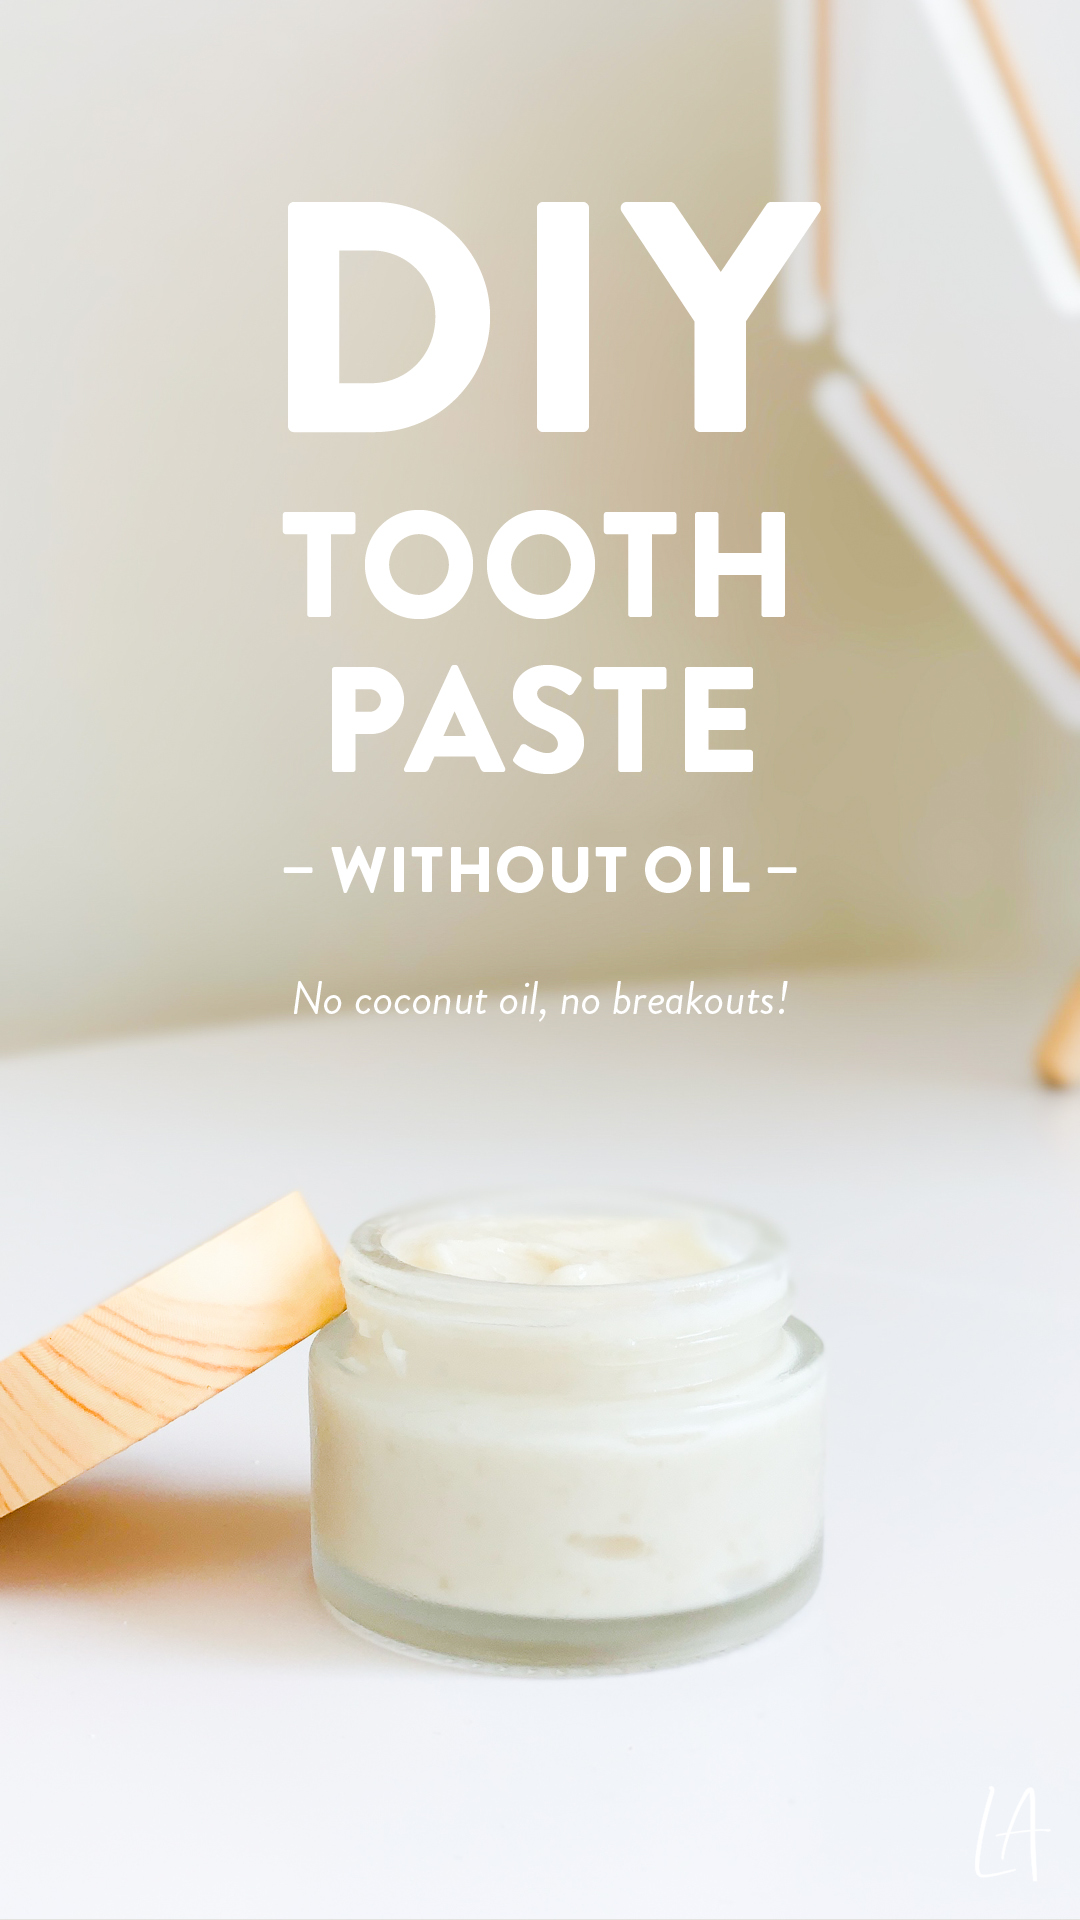 DIY Toothpaste without oil